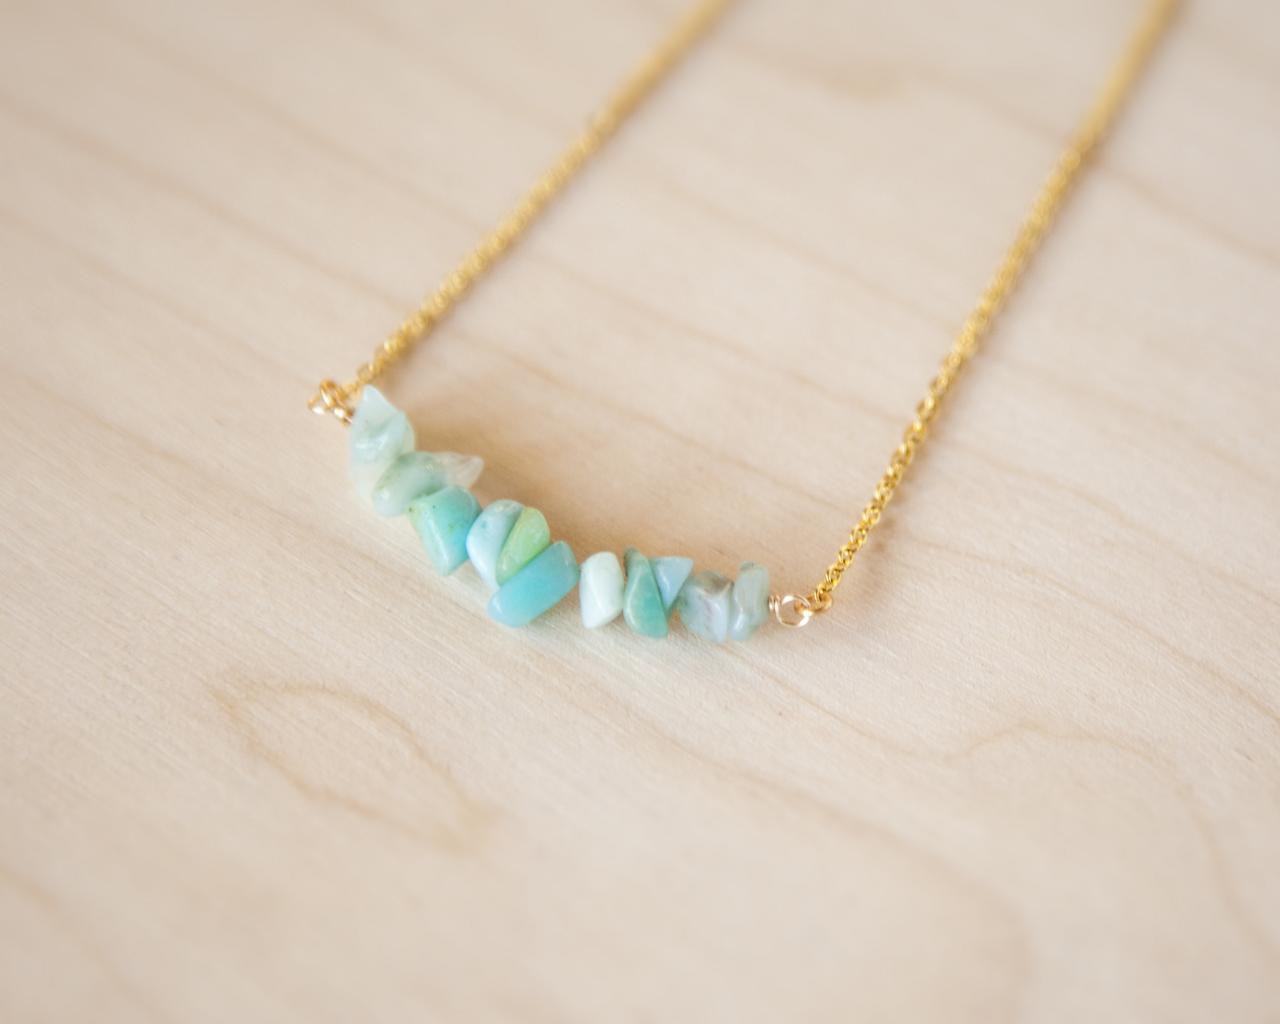 Amazonite Bar Necklace, Amazonite Necklace, Pieces Birthstone Necklace, Mint Green Crystal Necklace, Raw Stone Necklace, Layering Necklace